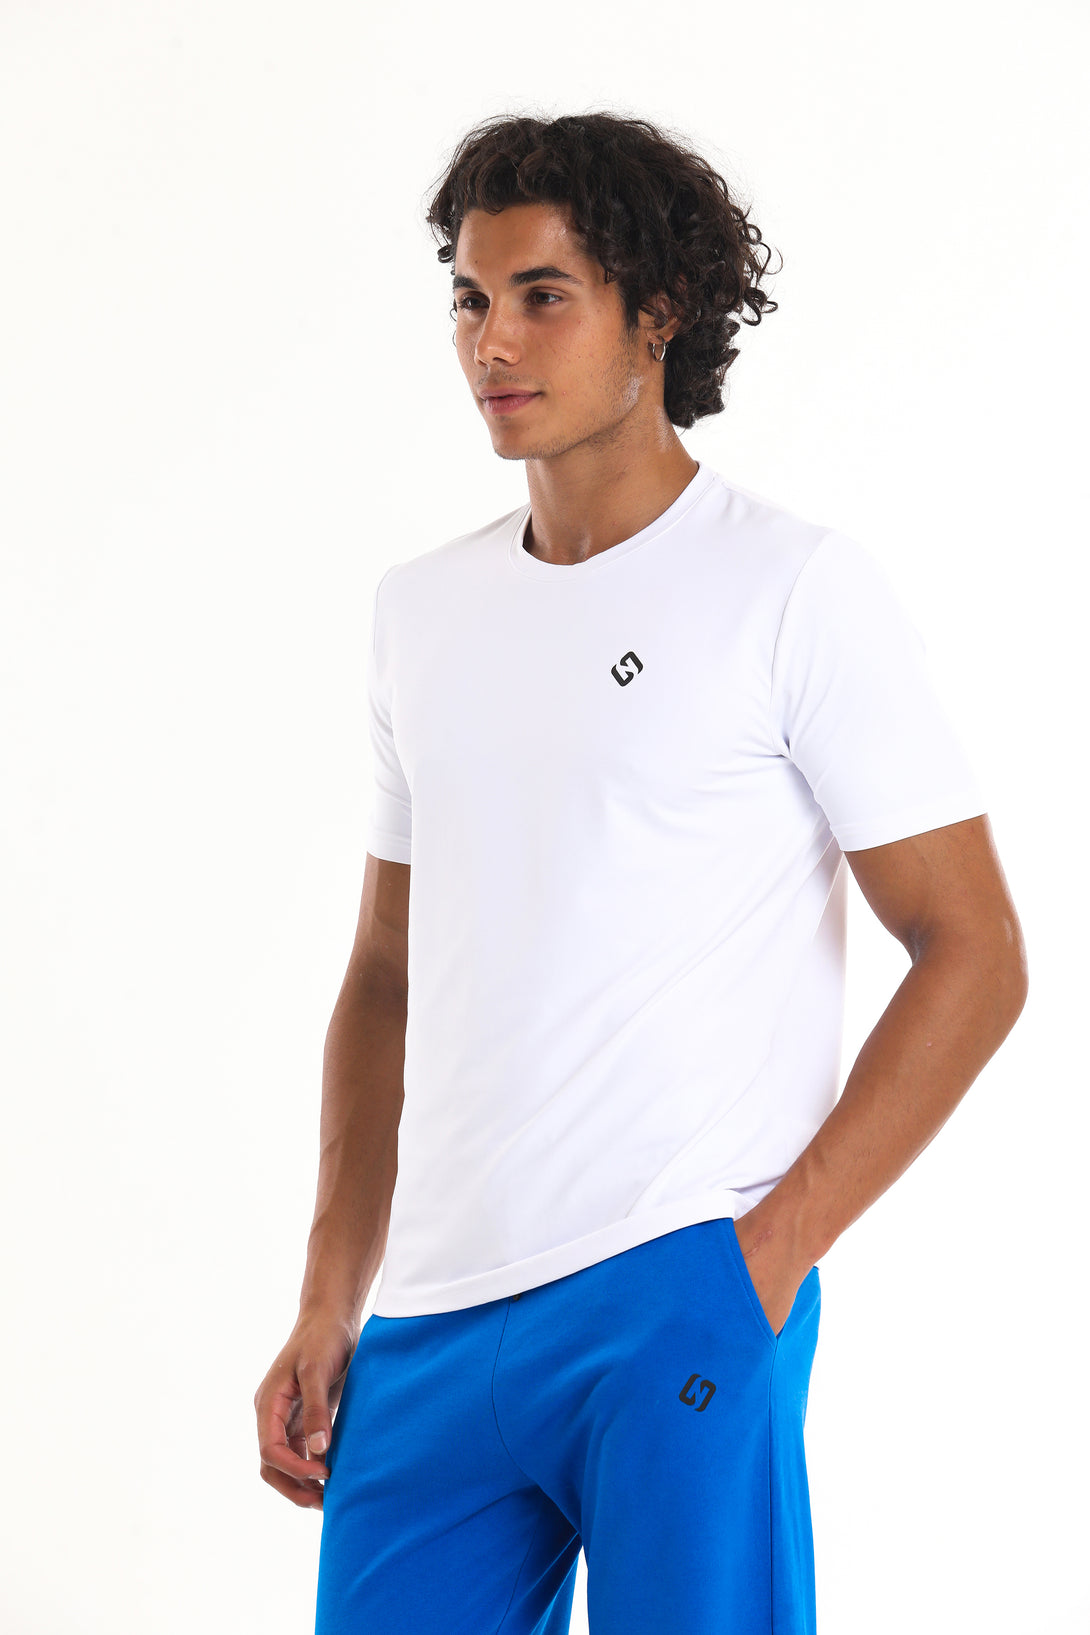 A Man Wearing White Color Essential Workout T-Shirt